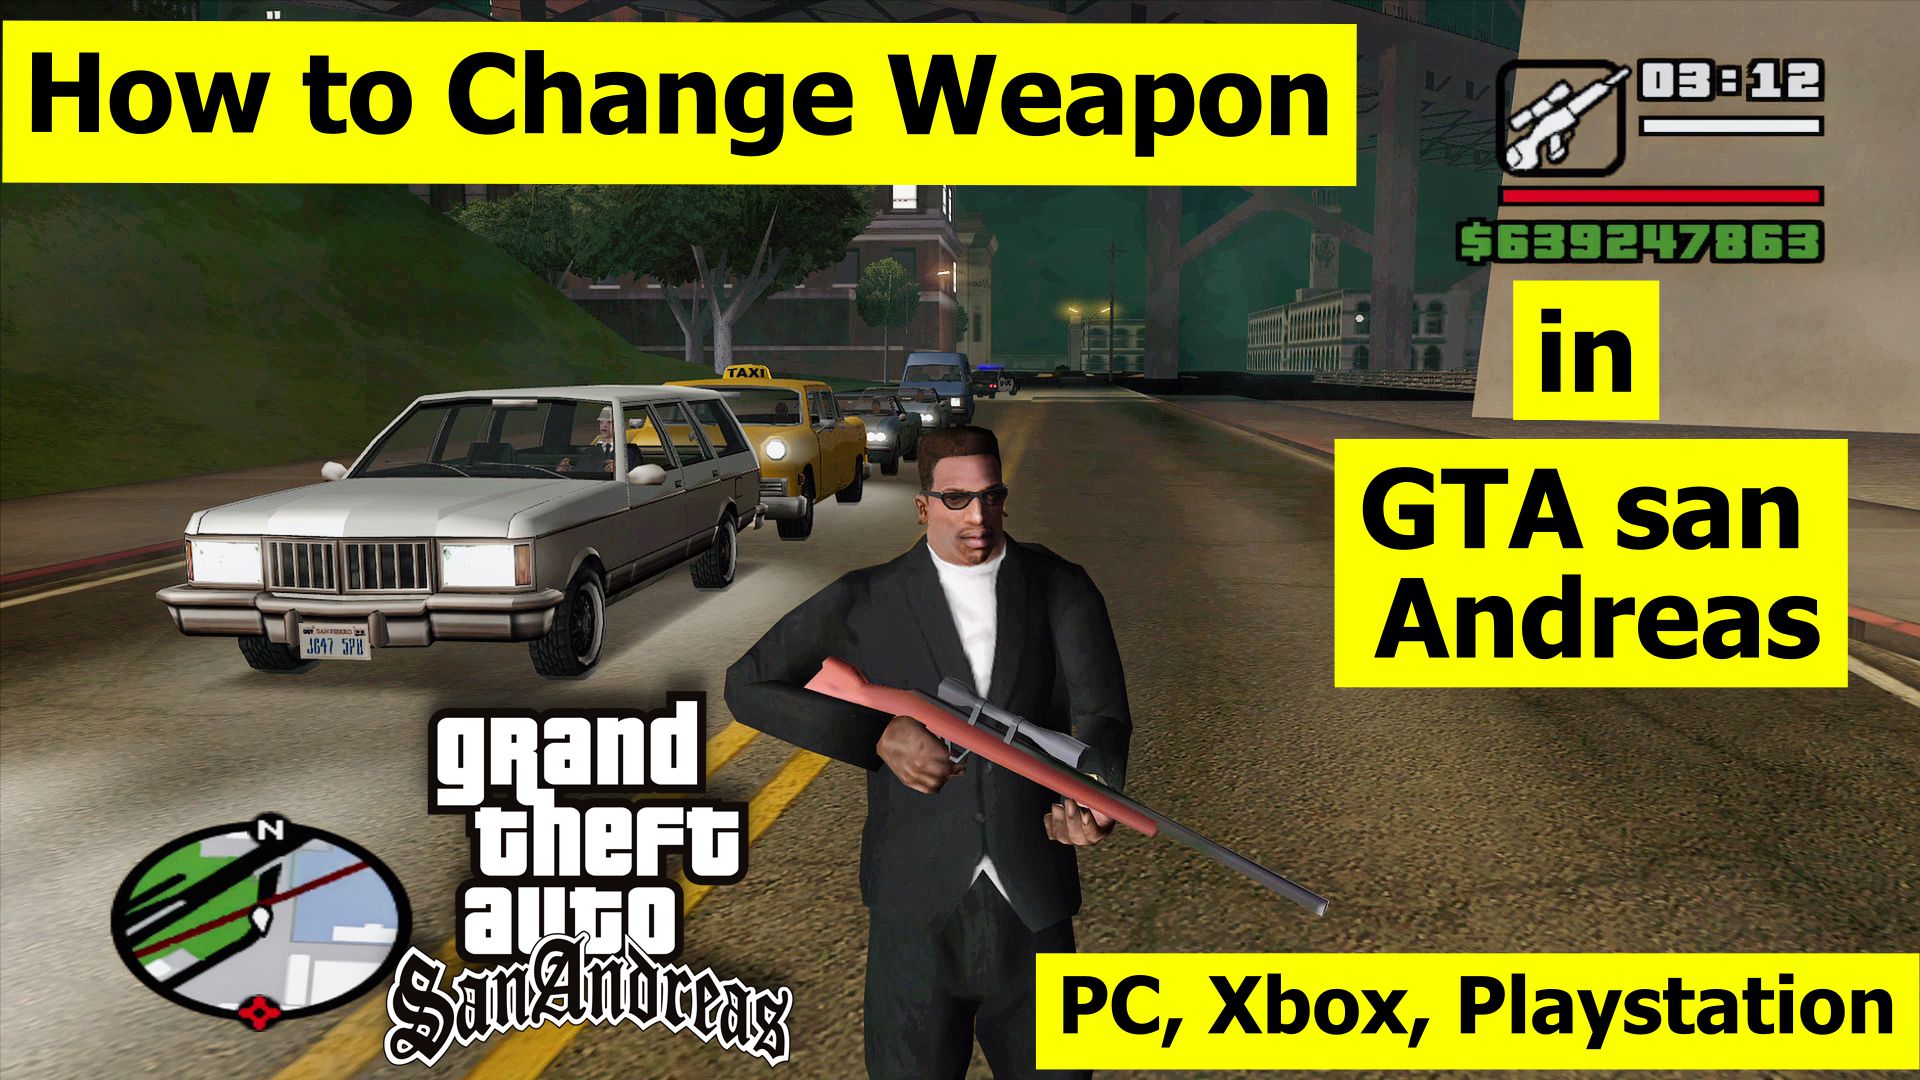 how to change weapon in GTA San Andreas - PC, Xbox, Playstation